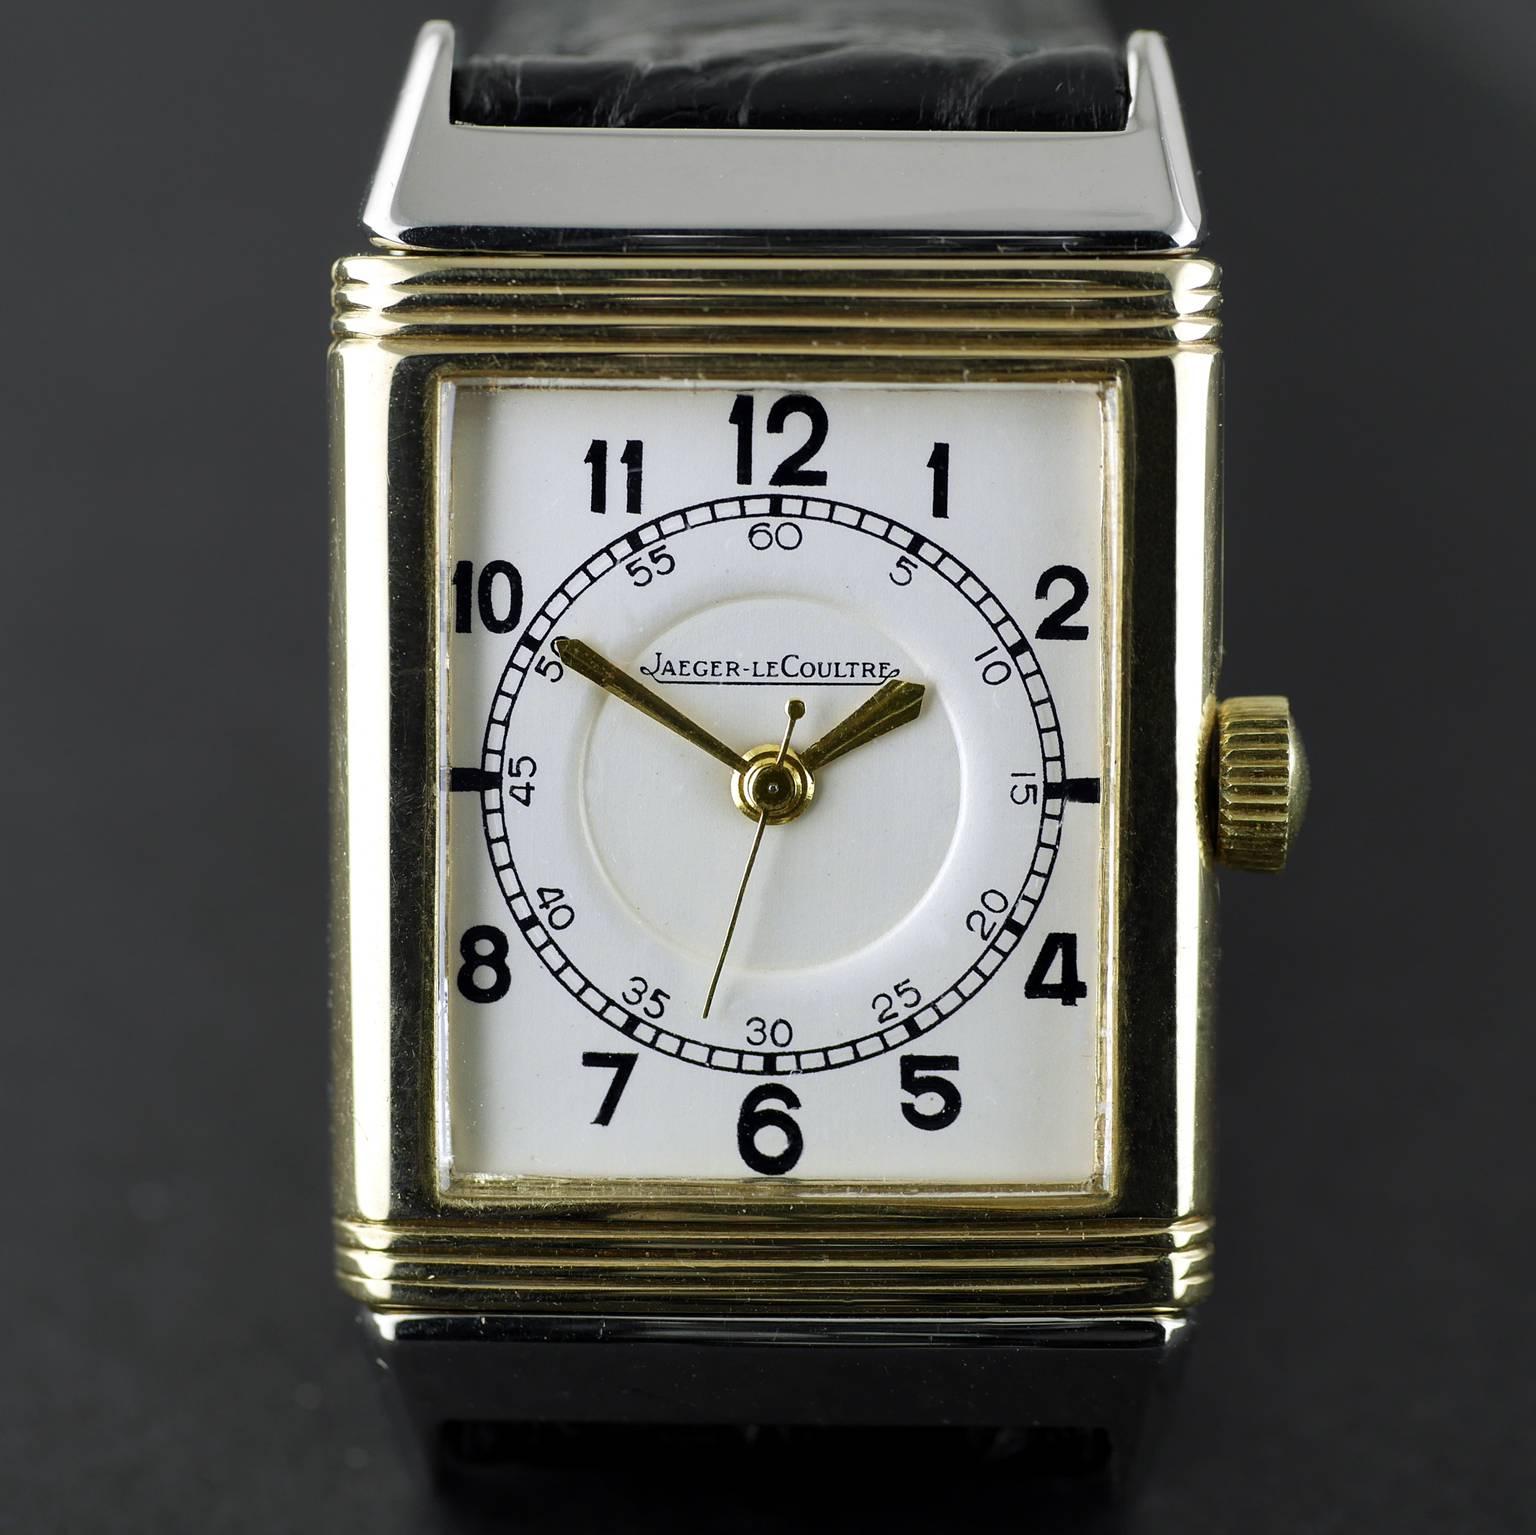 A fine and rare Art Deco Jaeger Le Coultre Reverso wristwatch made in 1937.

The Reverso wristwatch was invented after a chance remark by Polo players in India during the colonial period bemoaning that the glass on their watches was being smashed